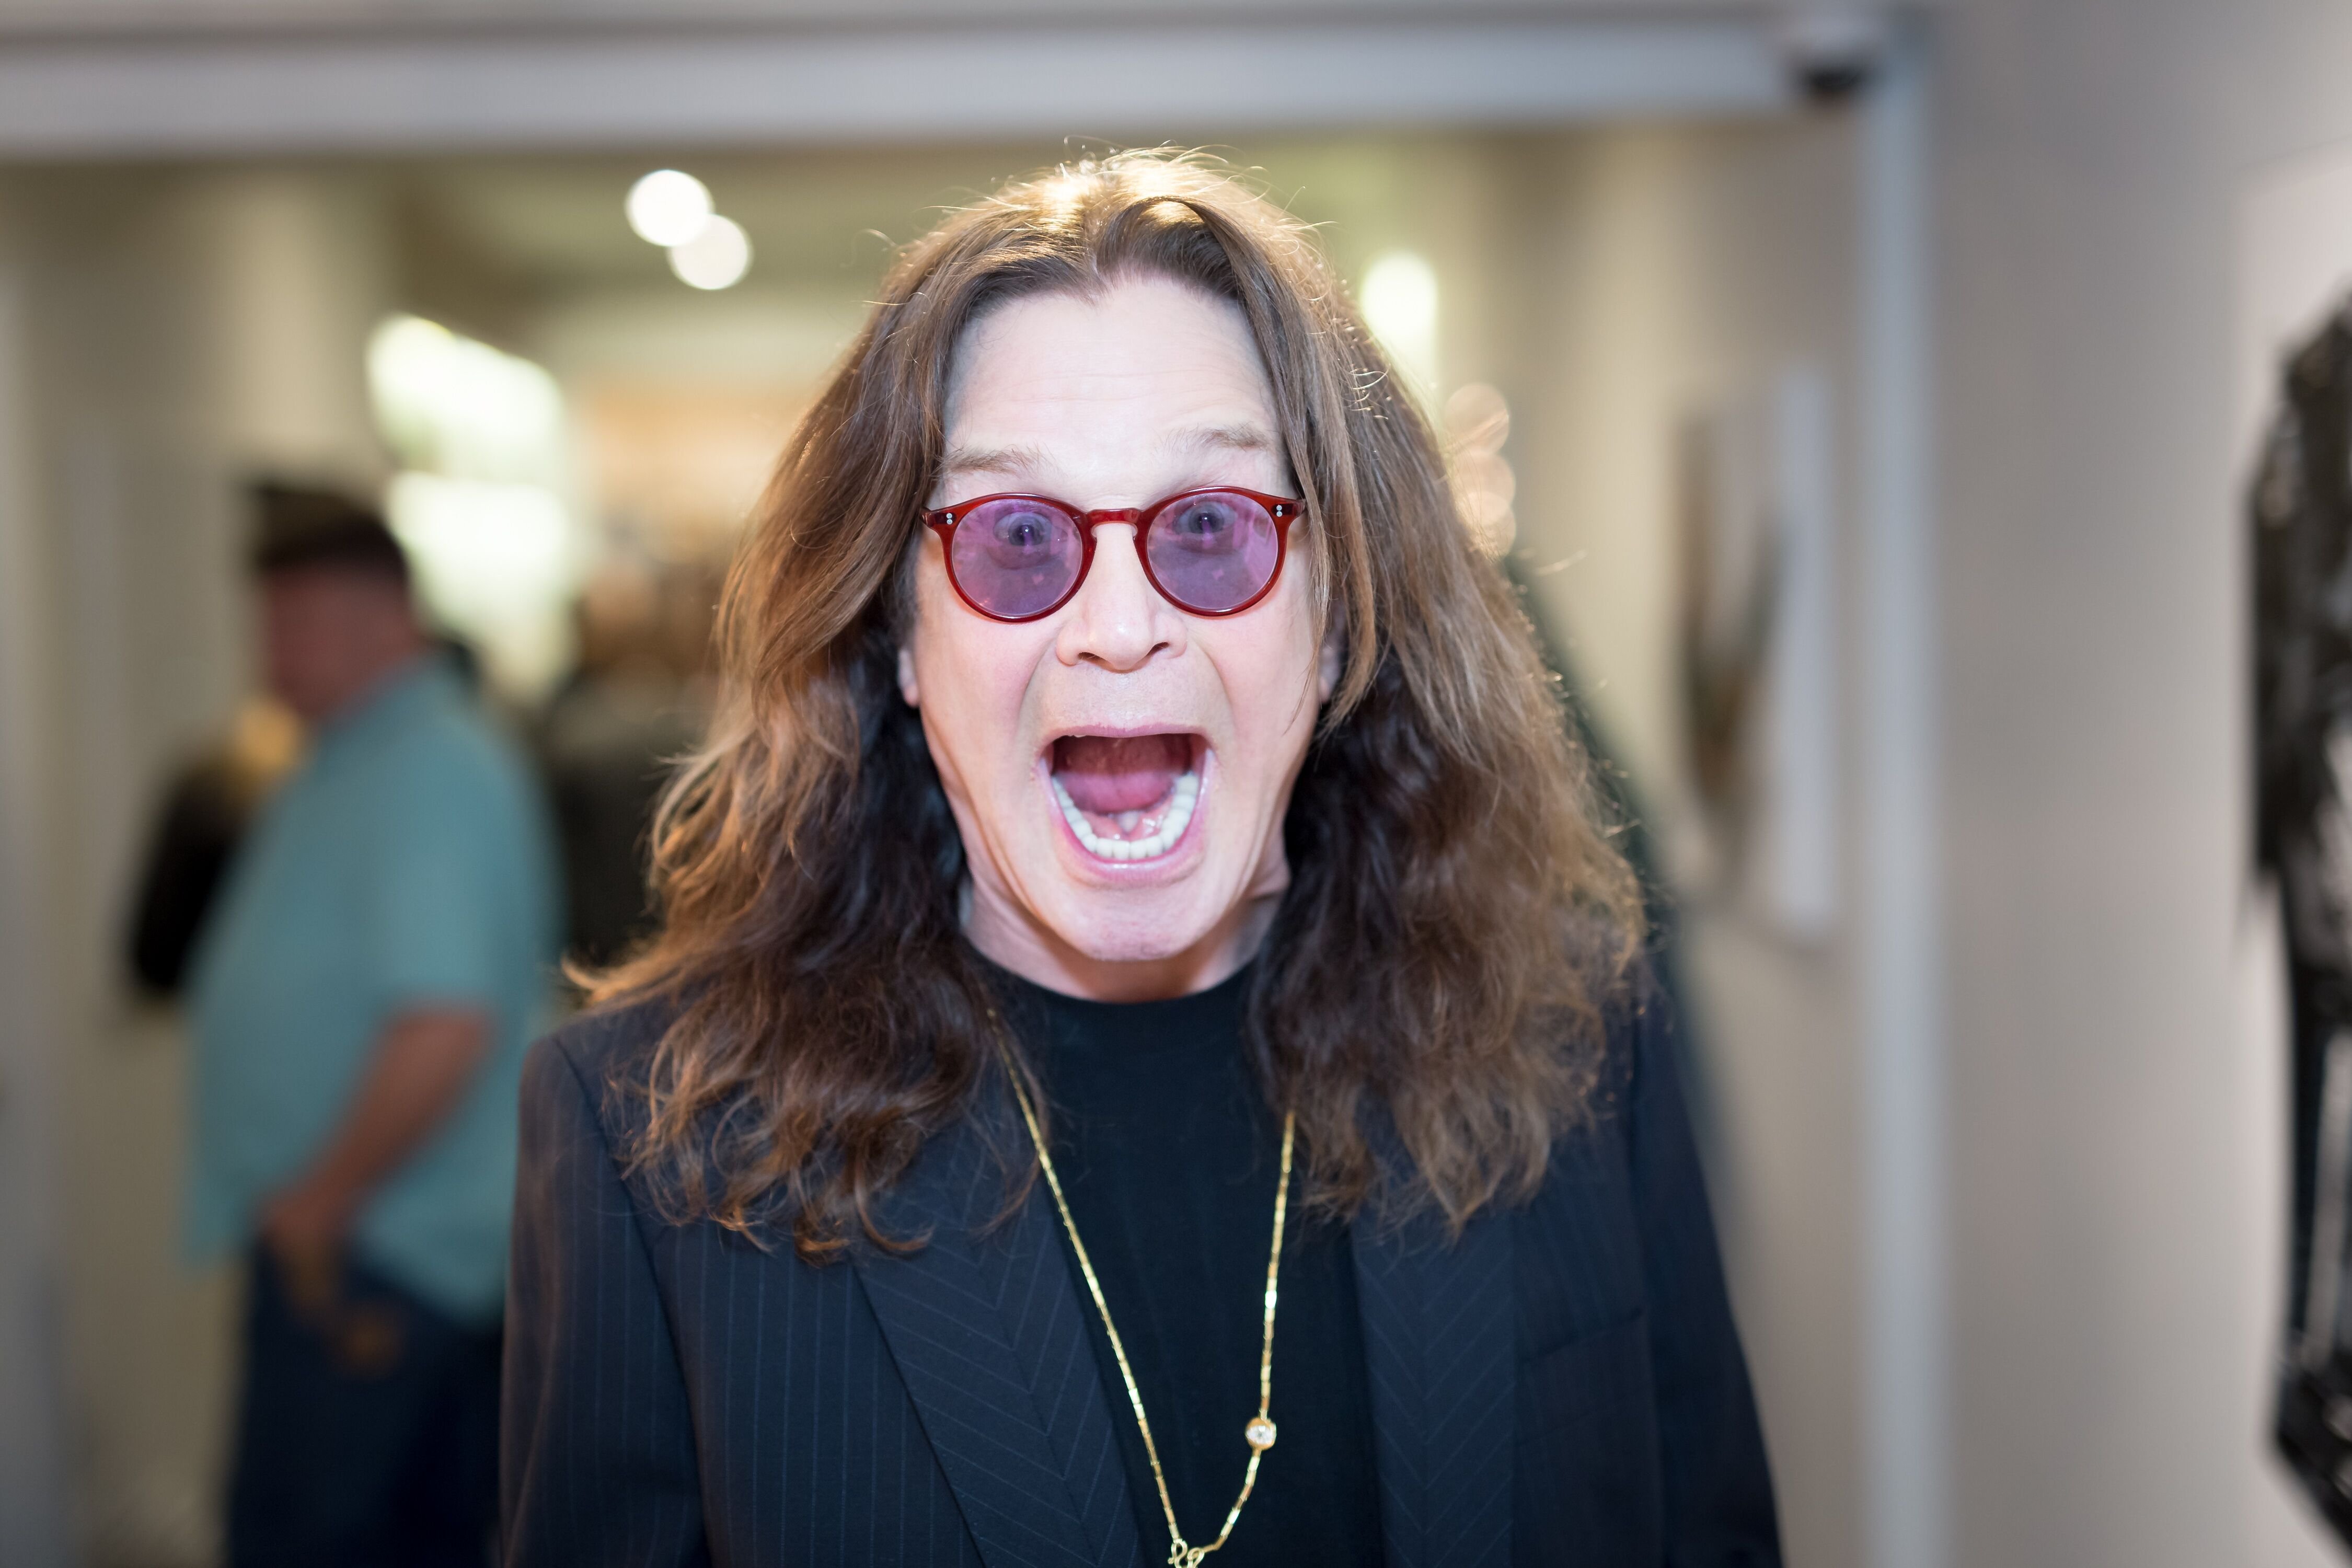 Ozzy Osbourne at the Billy Morrison Aude Somnia Solo Exhibition. | Source: Getty Images